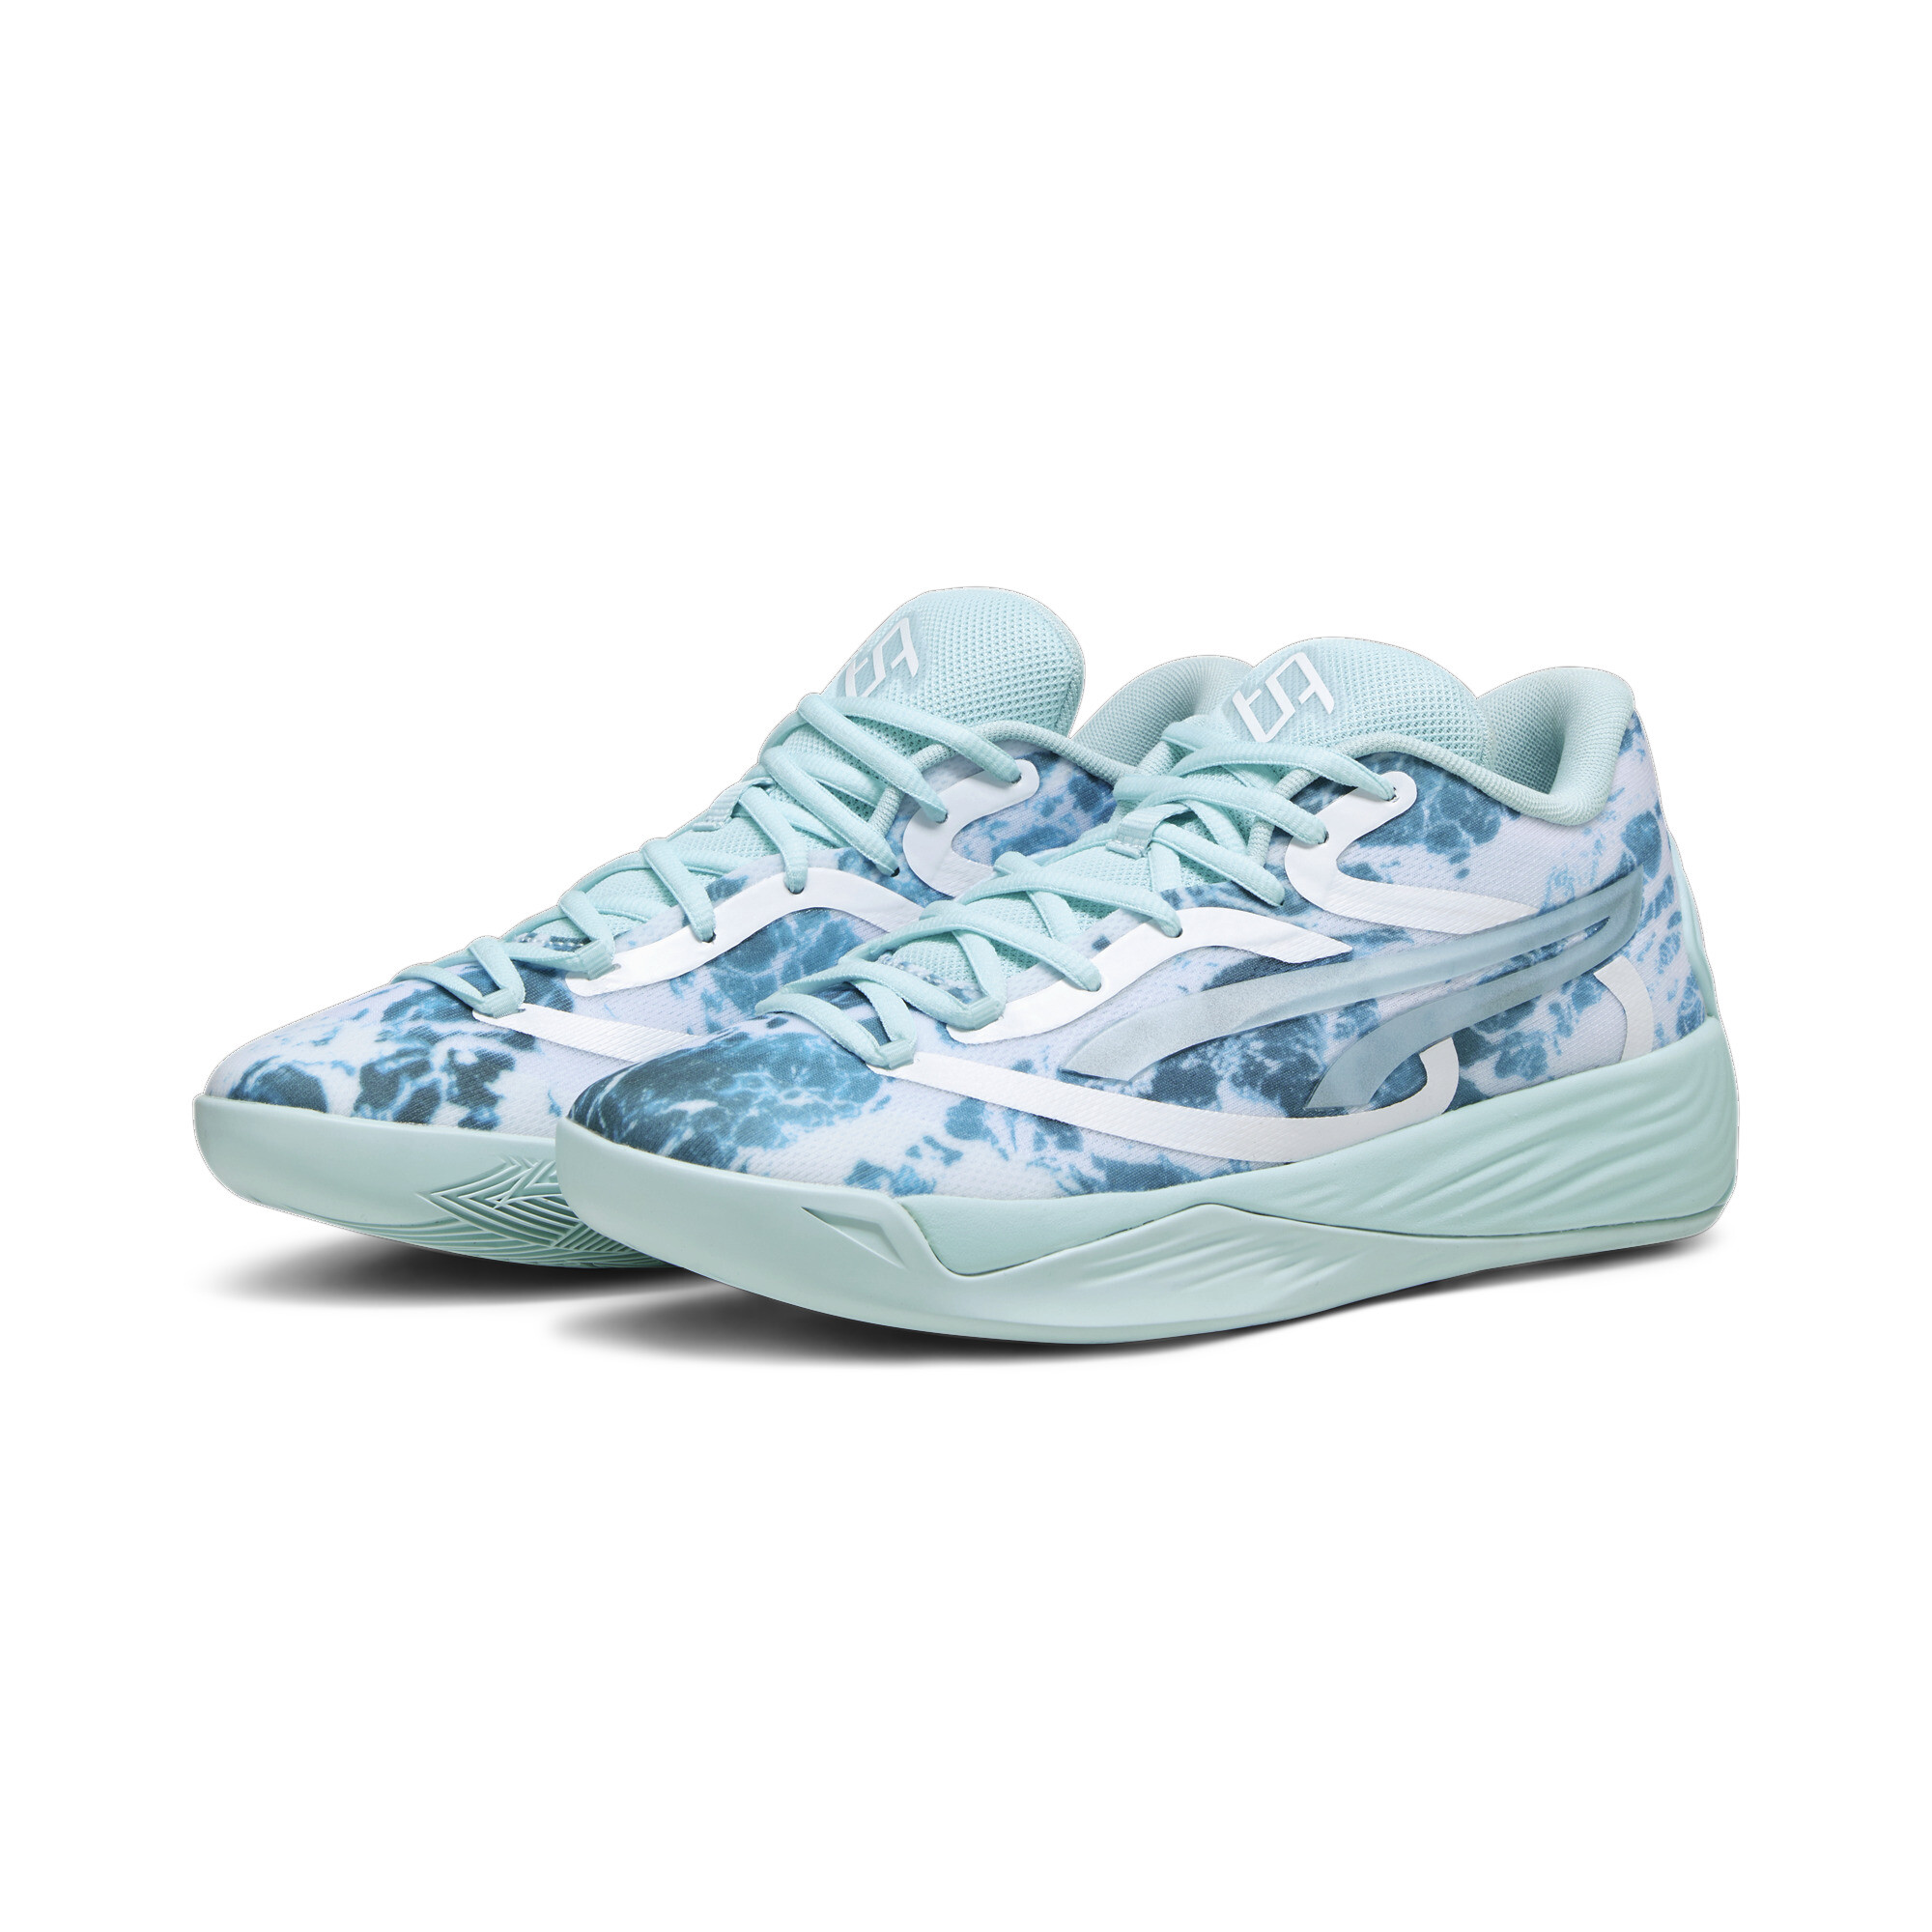 Women's Puma Stewie 2 Water's Basketball Shoes, Blue, Size 49.5, Shoes